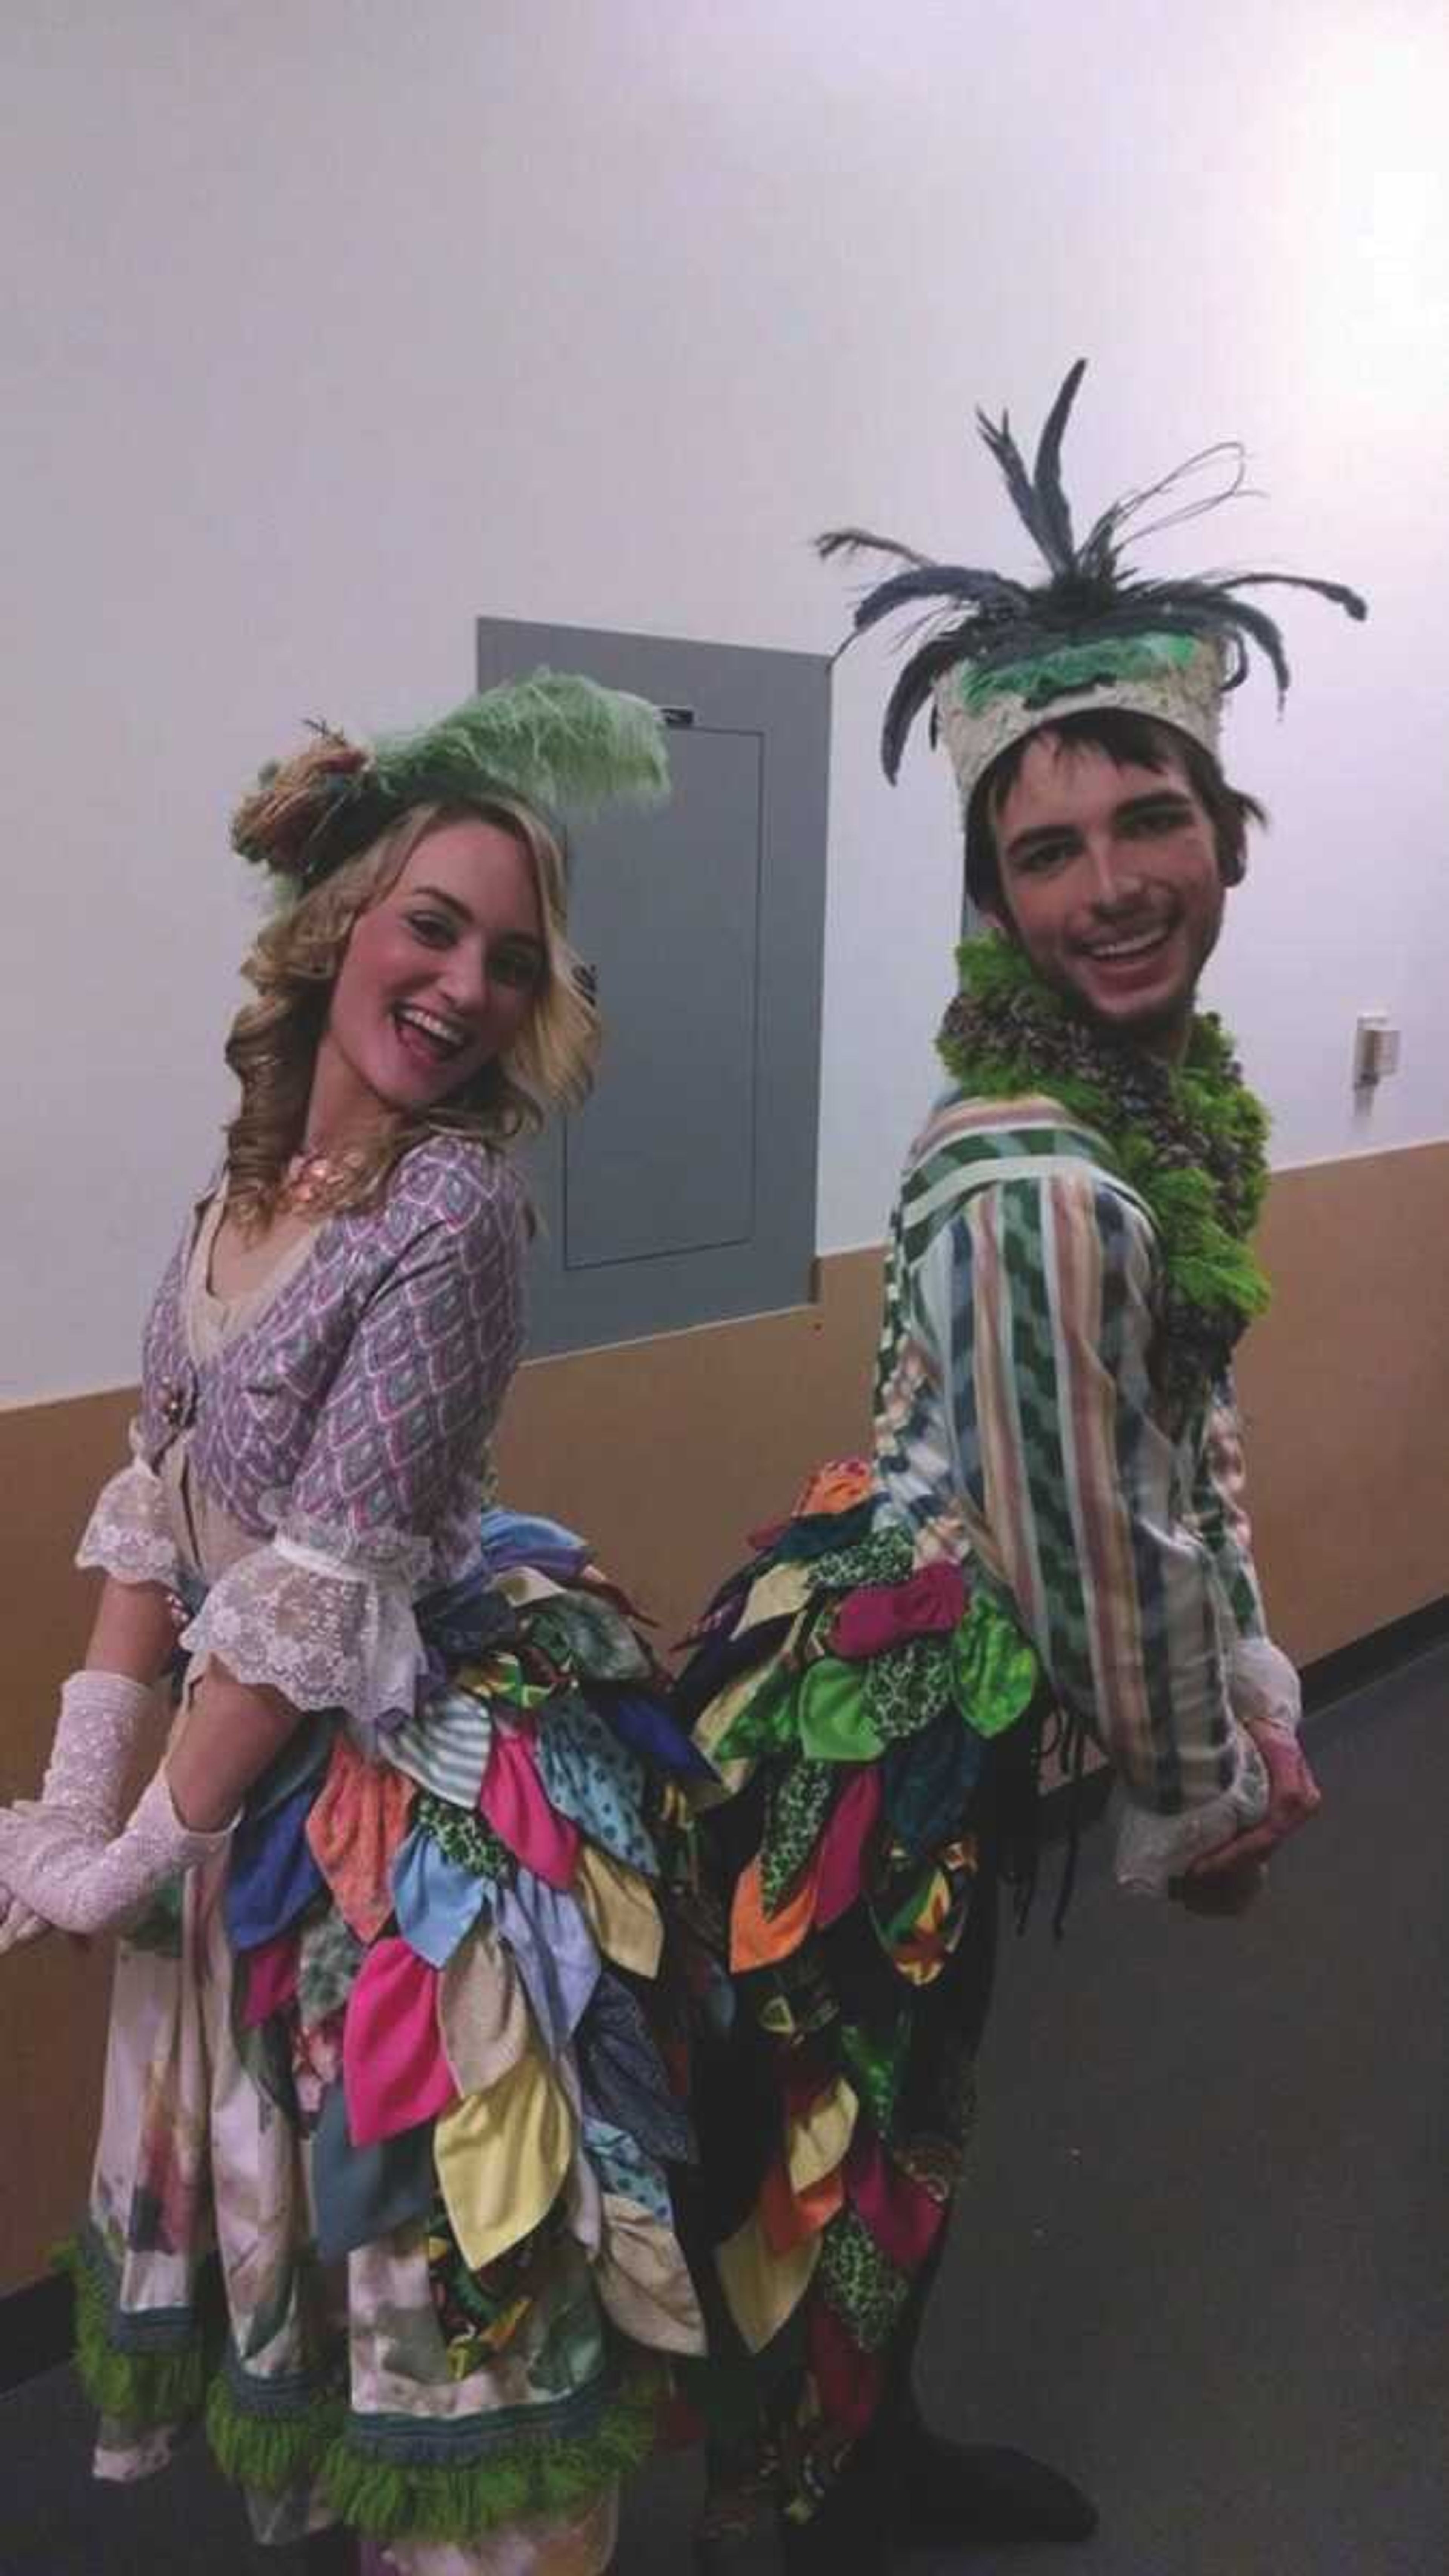 Madeline Flieg and Ethan Miller, senior music majors, pose backstage in costume for Southeast's opera production of "The Magic Flute" in 2014.